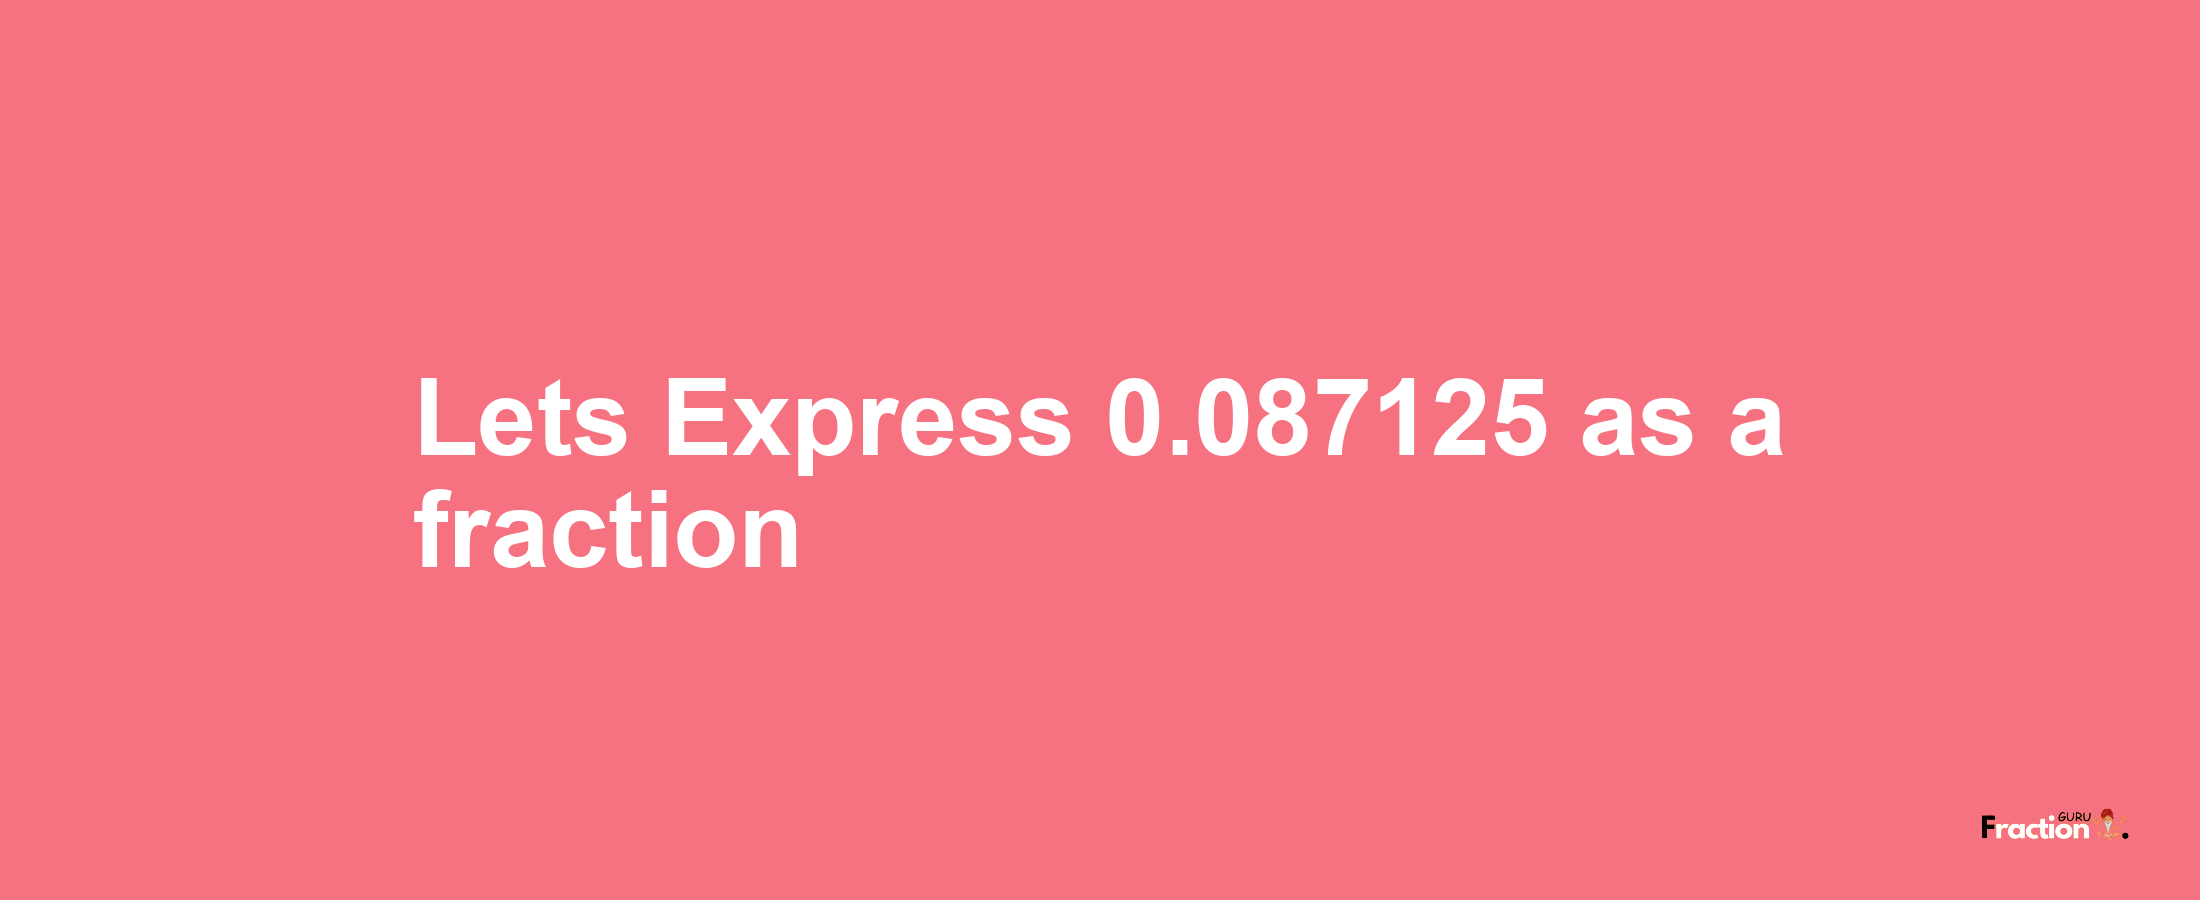 Lets Express 0.087125 as afraction